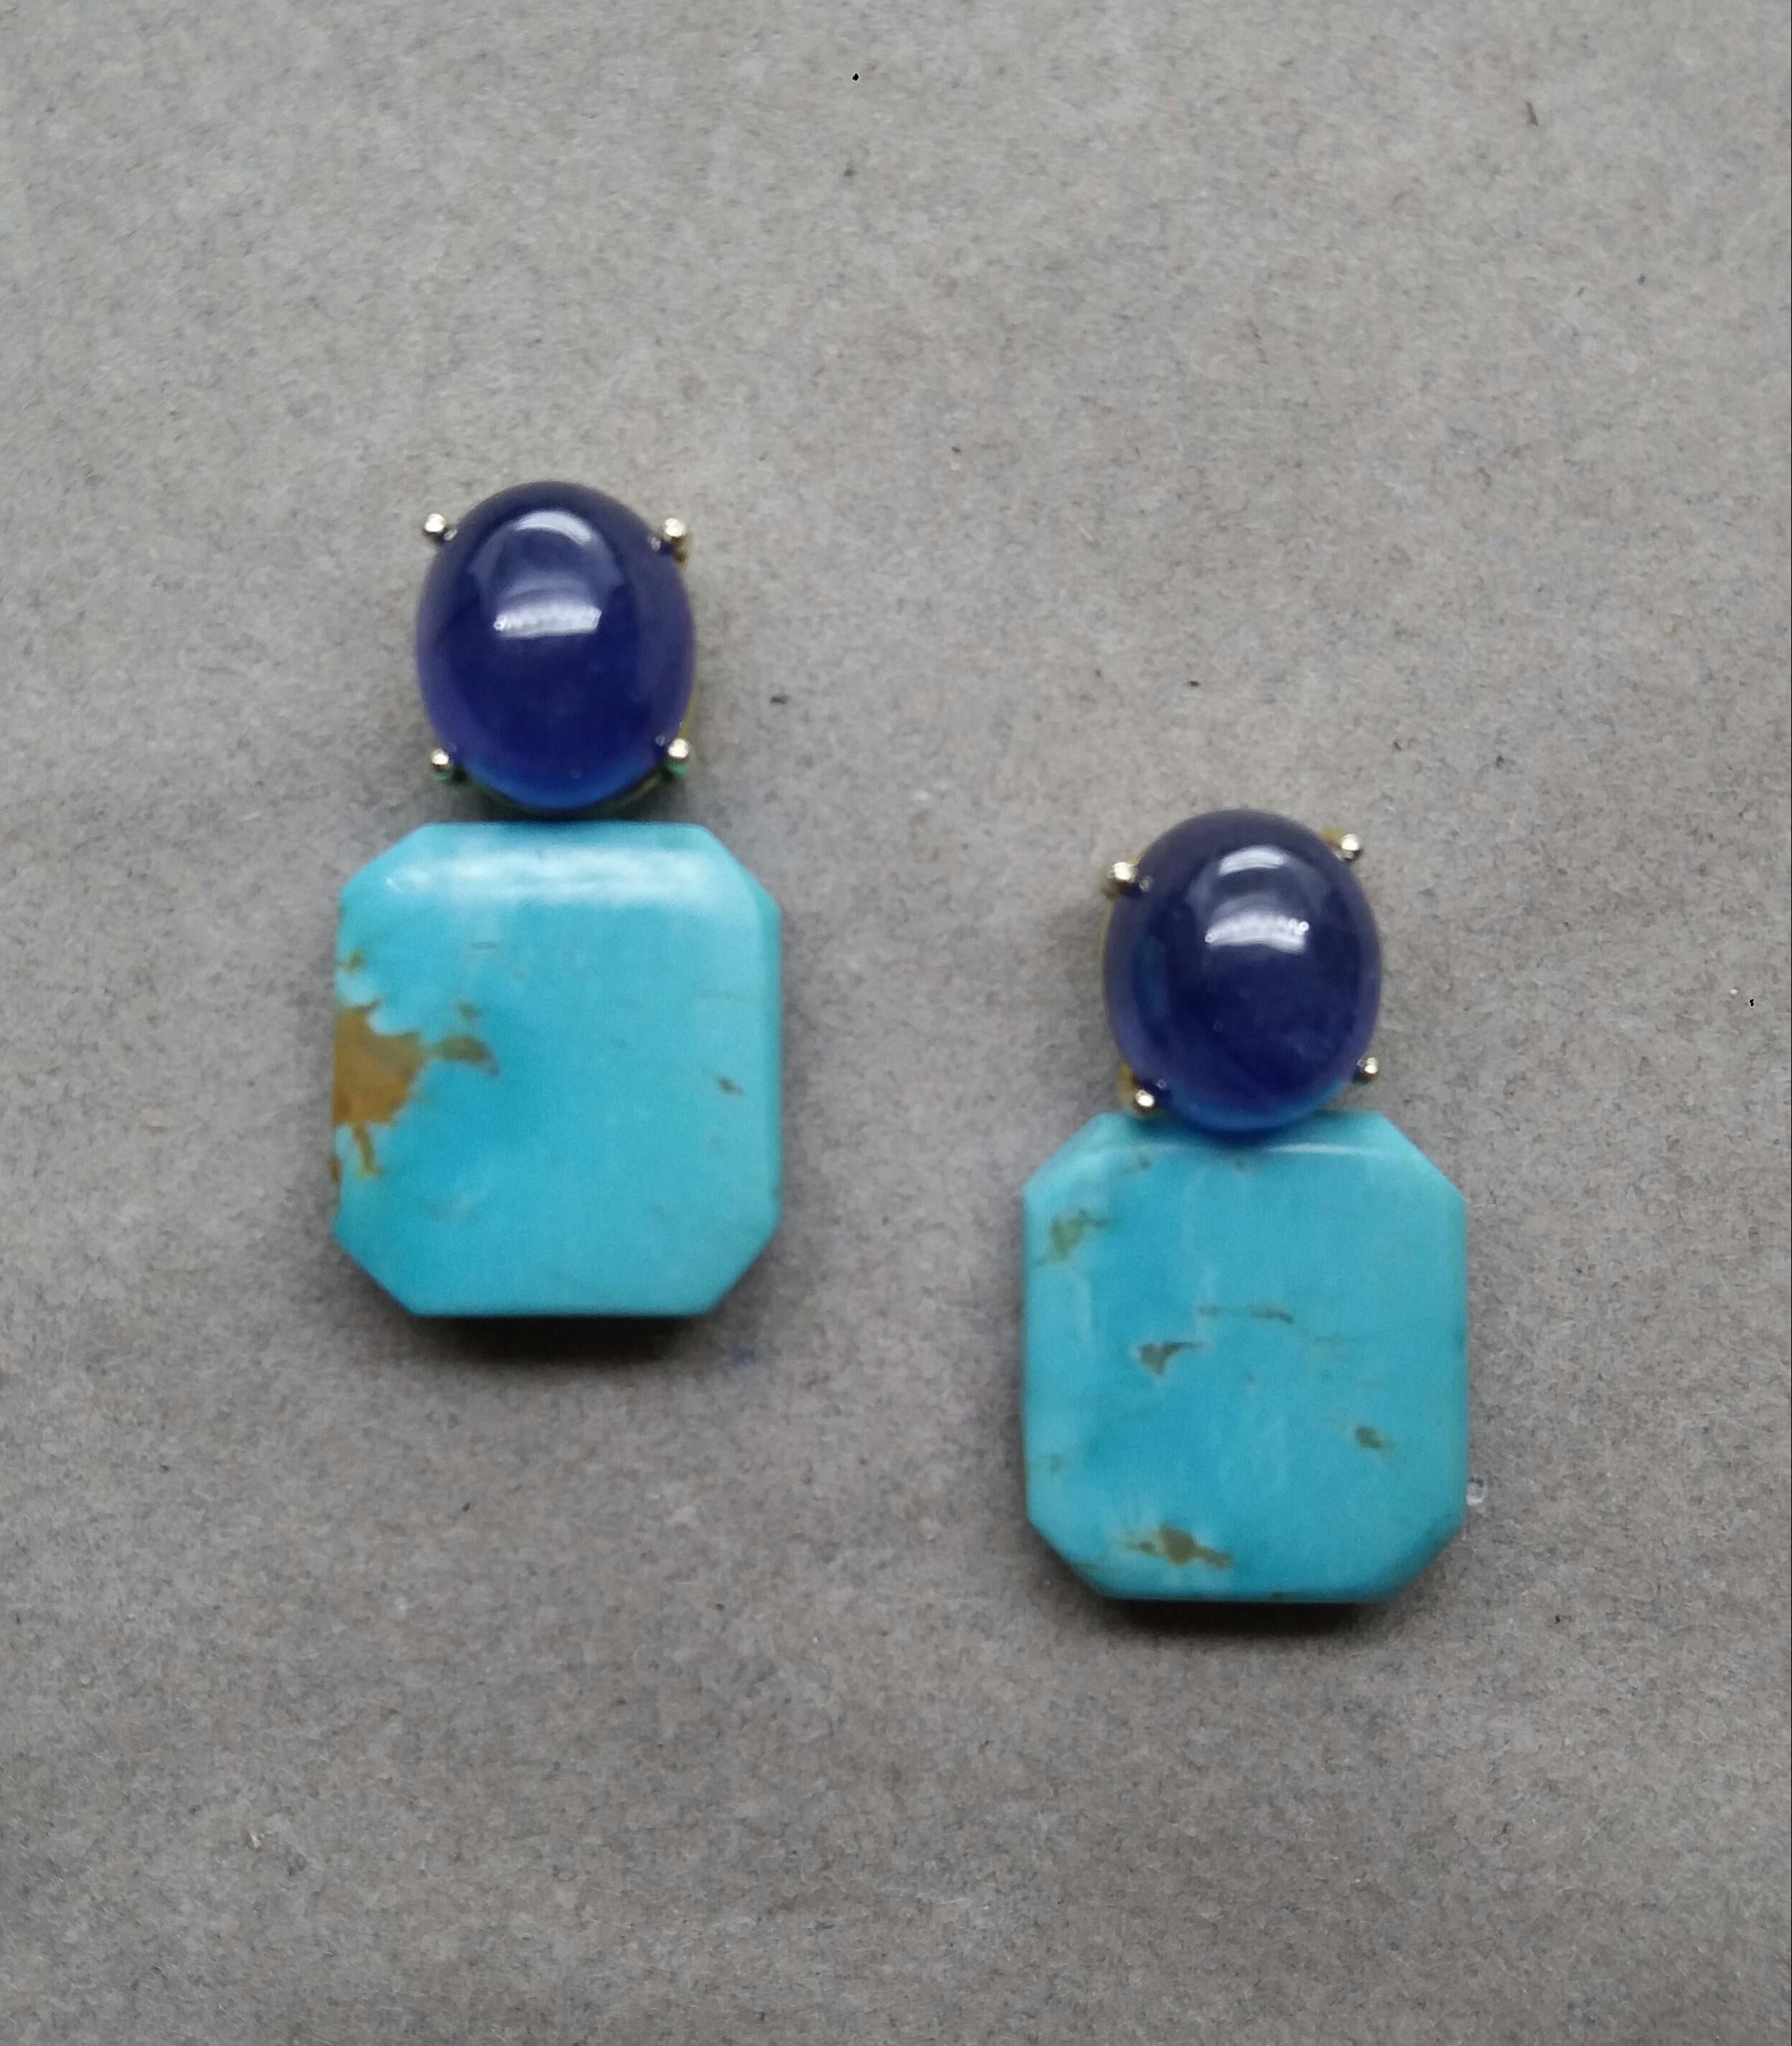 In these simple and chic earrings we have 2  Octagon Shape Natural Turquoise measuring 16 x 18 mm.,suspended from 2 nice  Blue Sapphire  oval cabochons size 10 x 11 mm for a total weight of 19,50 carats set in 14 kt yellow gold.

In 1978 our